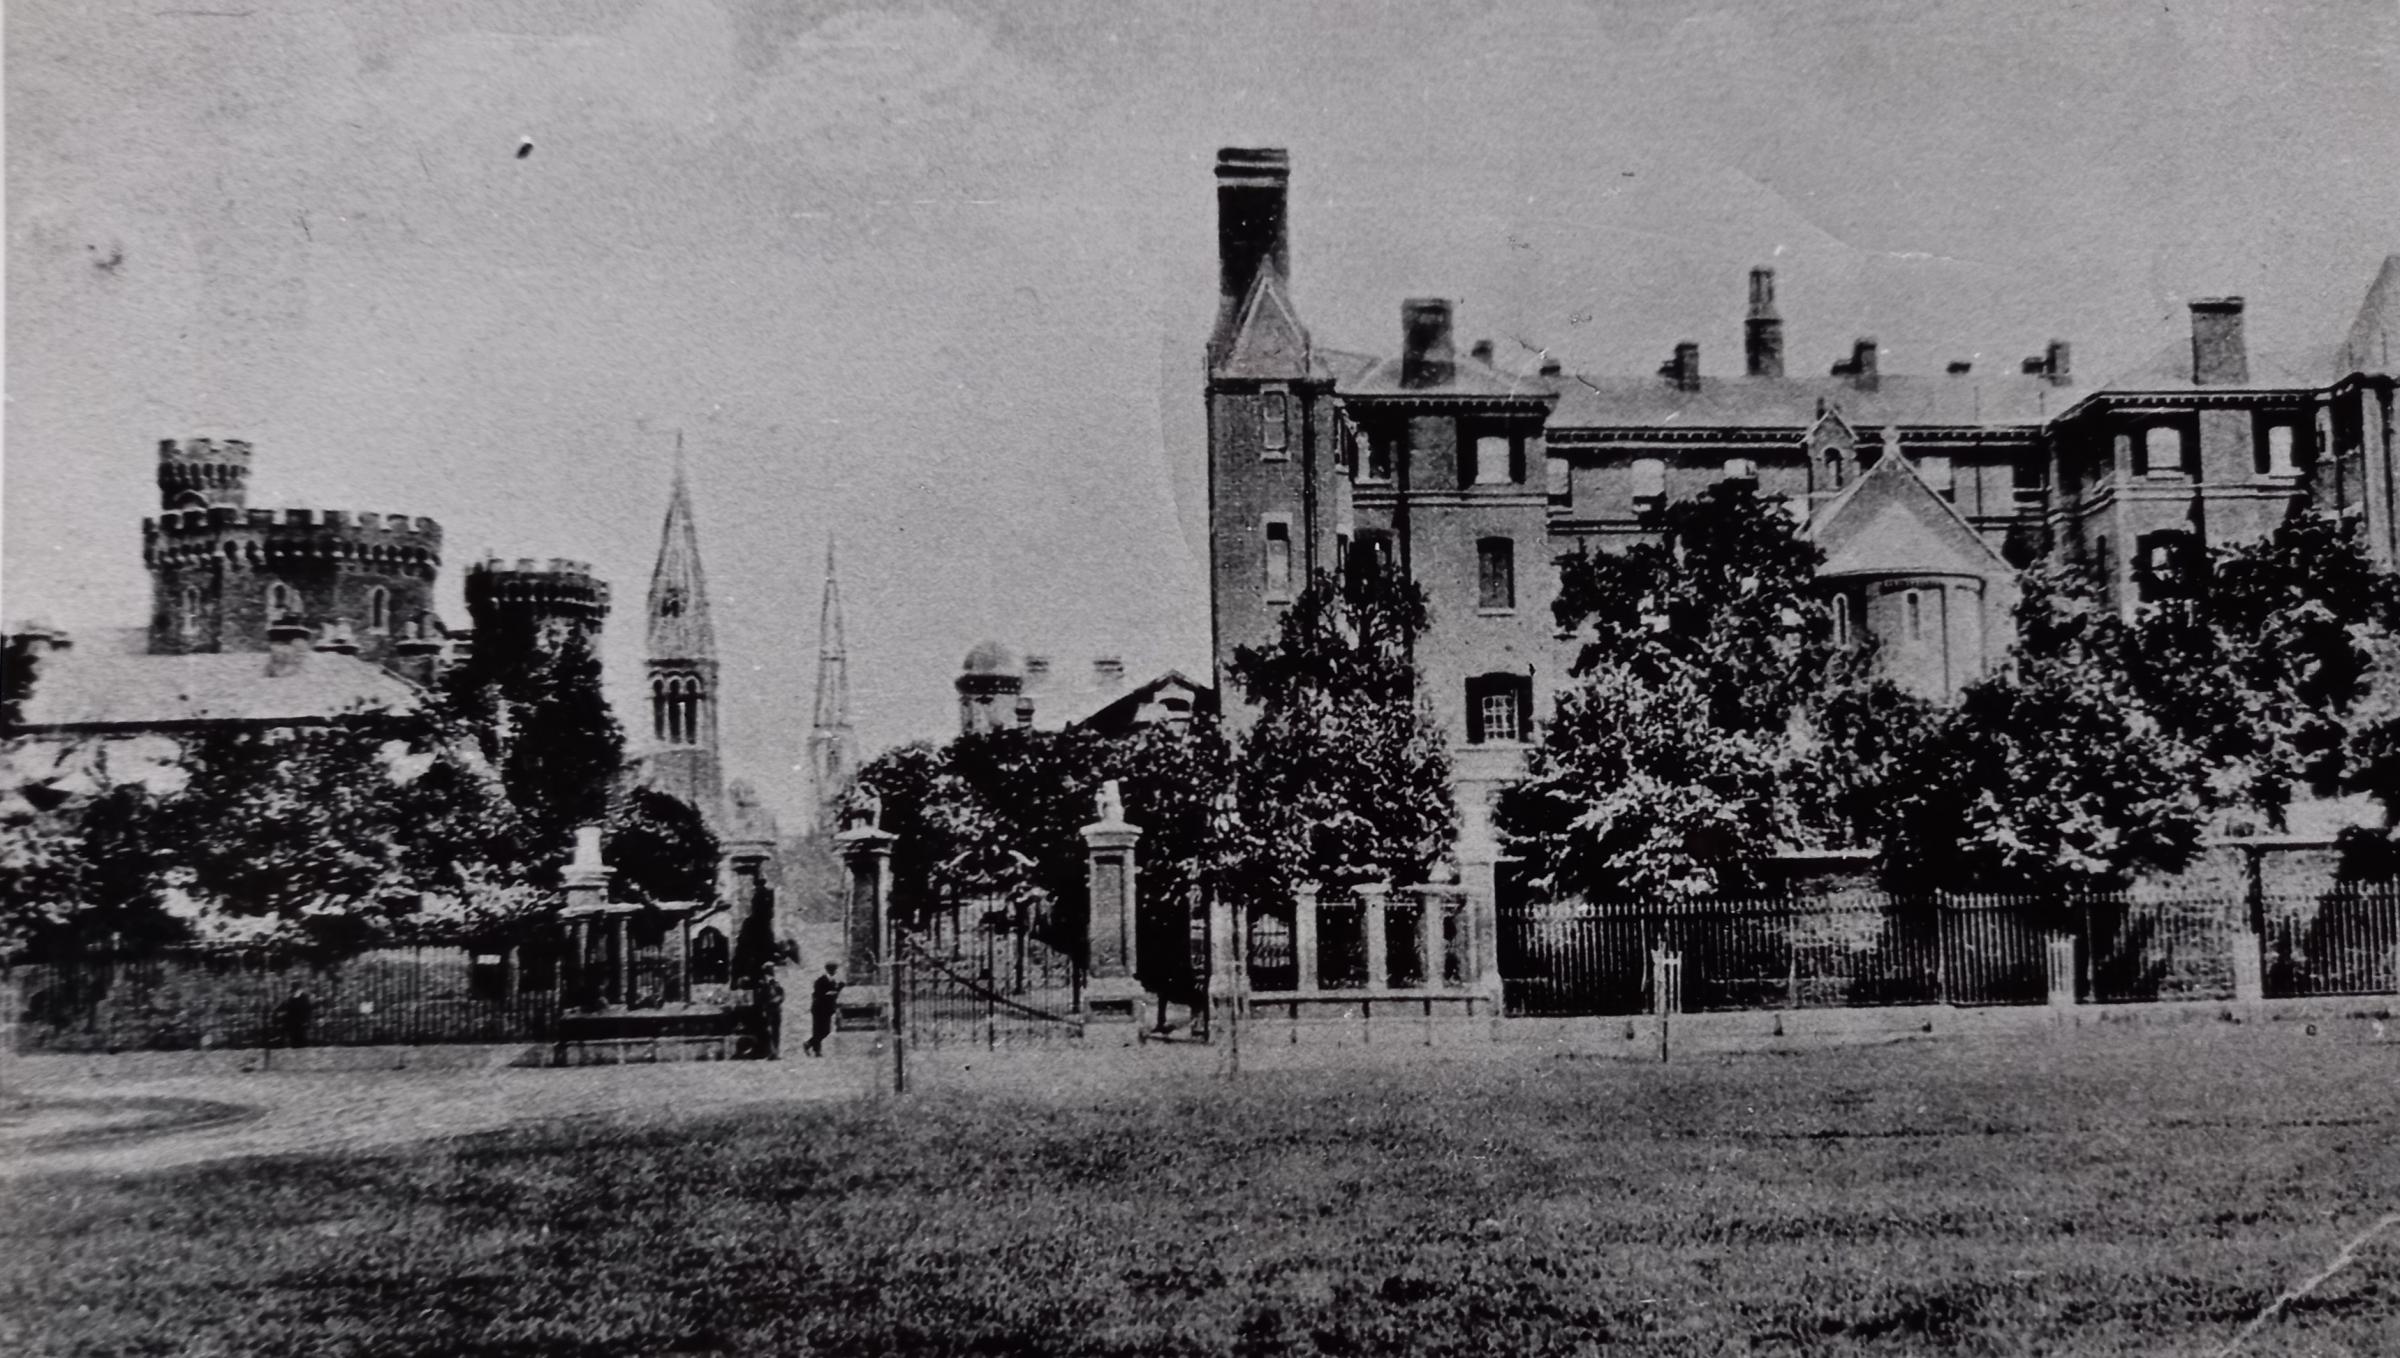 Taken from Pitchcroft in 1920, this image shows the Royal Infirmary, while opposite Castle Street is the old castellated prison, which was due to close two years later.